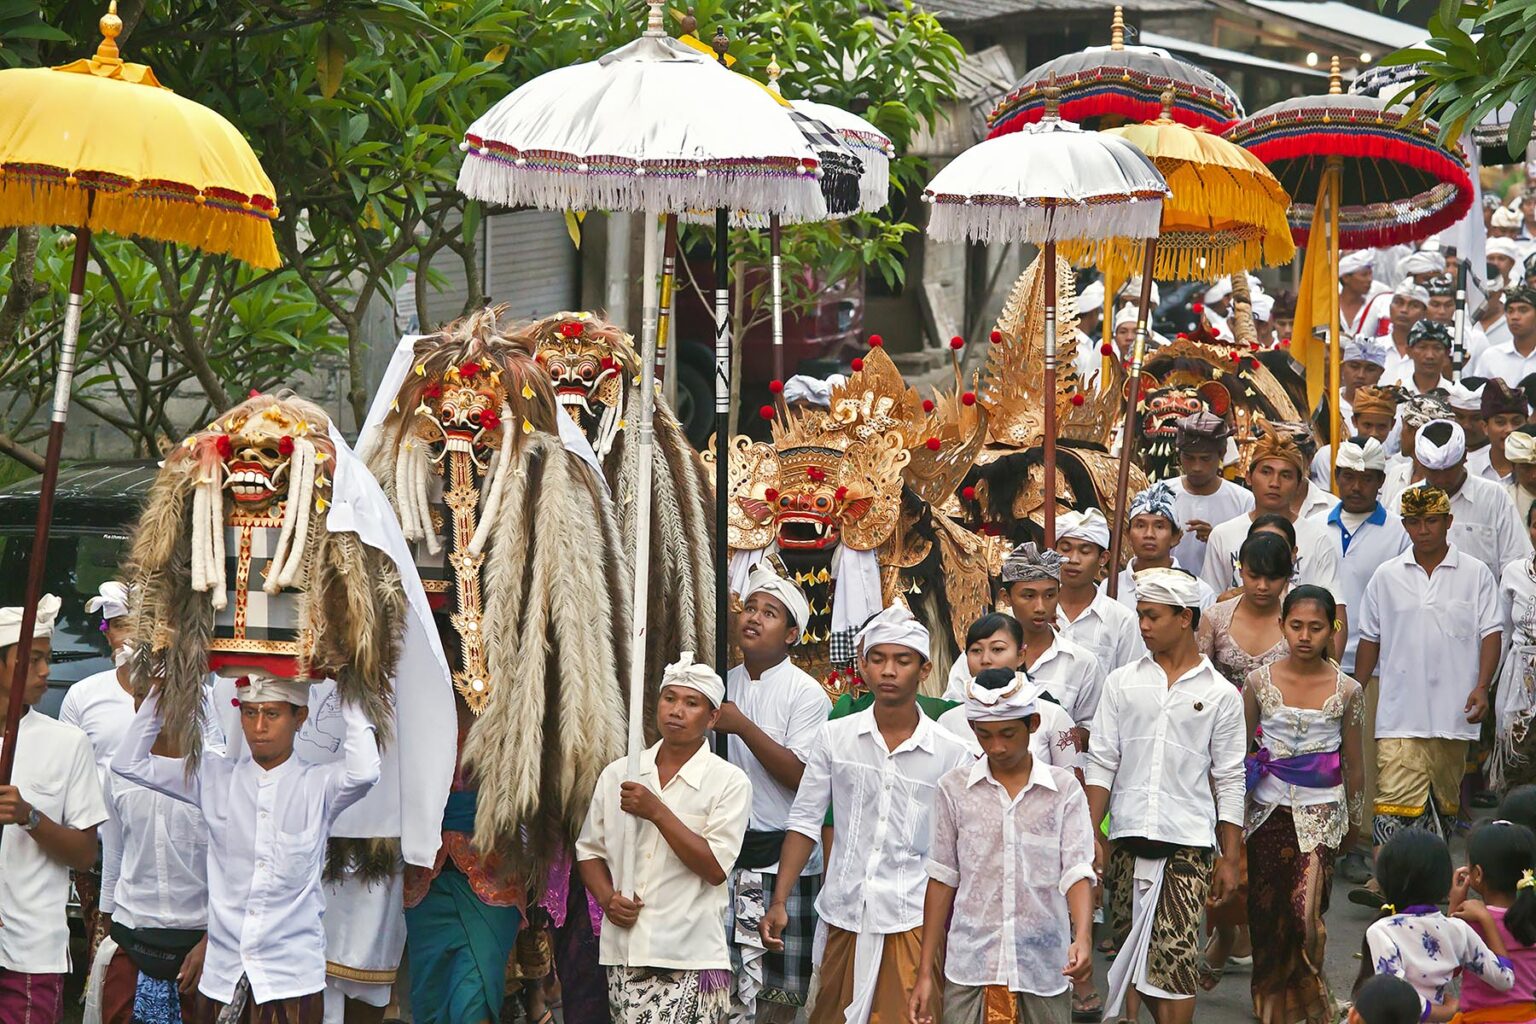 A BARONG COSTUME and LION MASKS used in traditional LEGONG dancing are carried during a HINDU PROCESSION for a temple anniversary - UBUD, BALI